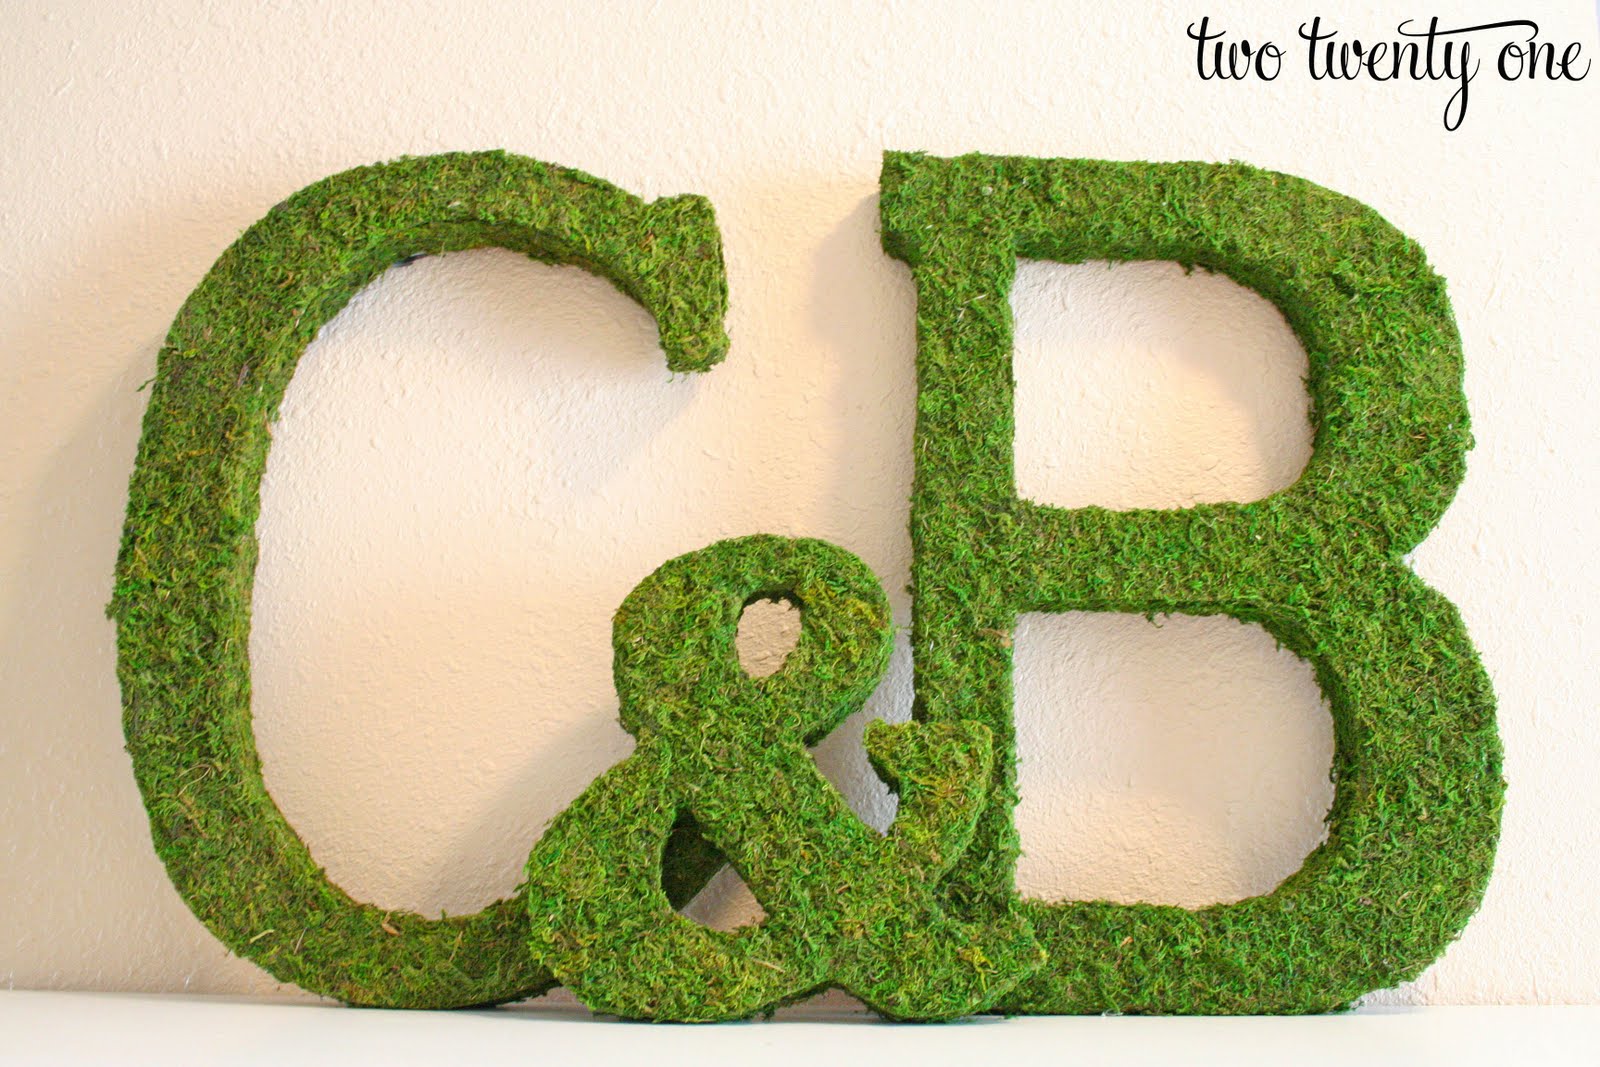 Chelsea Gets Married: Moss Covered Initials & Ampersand